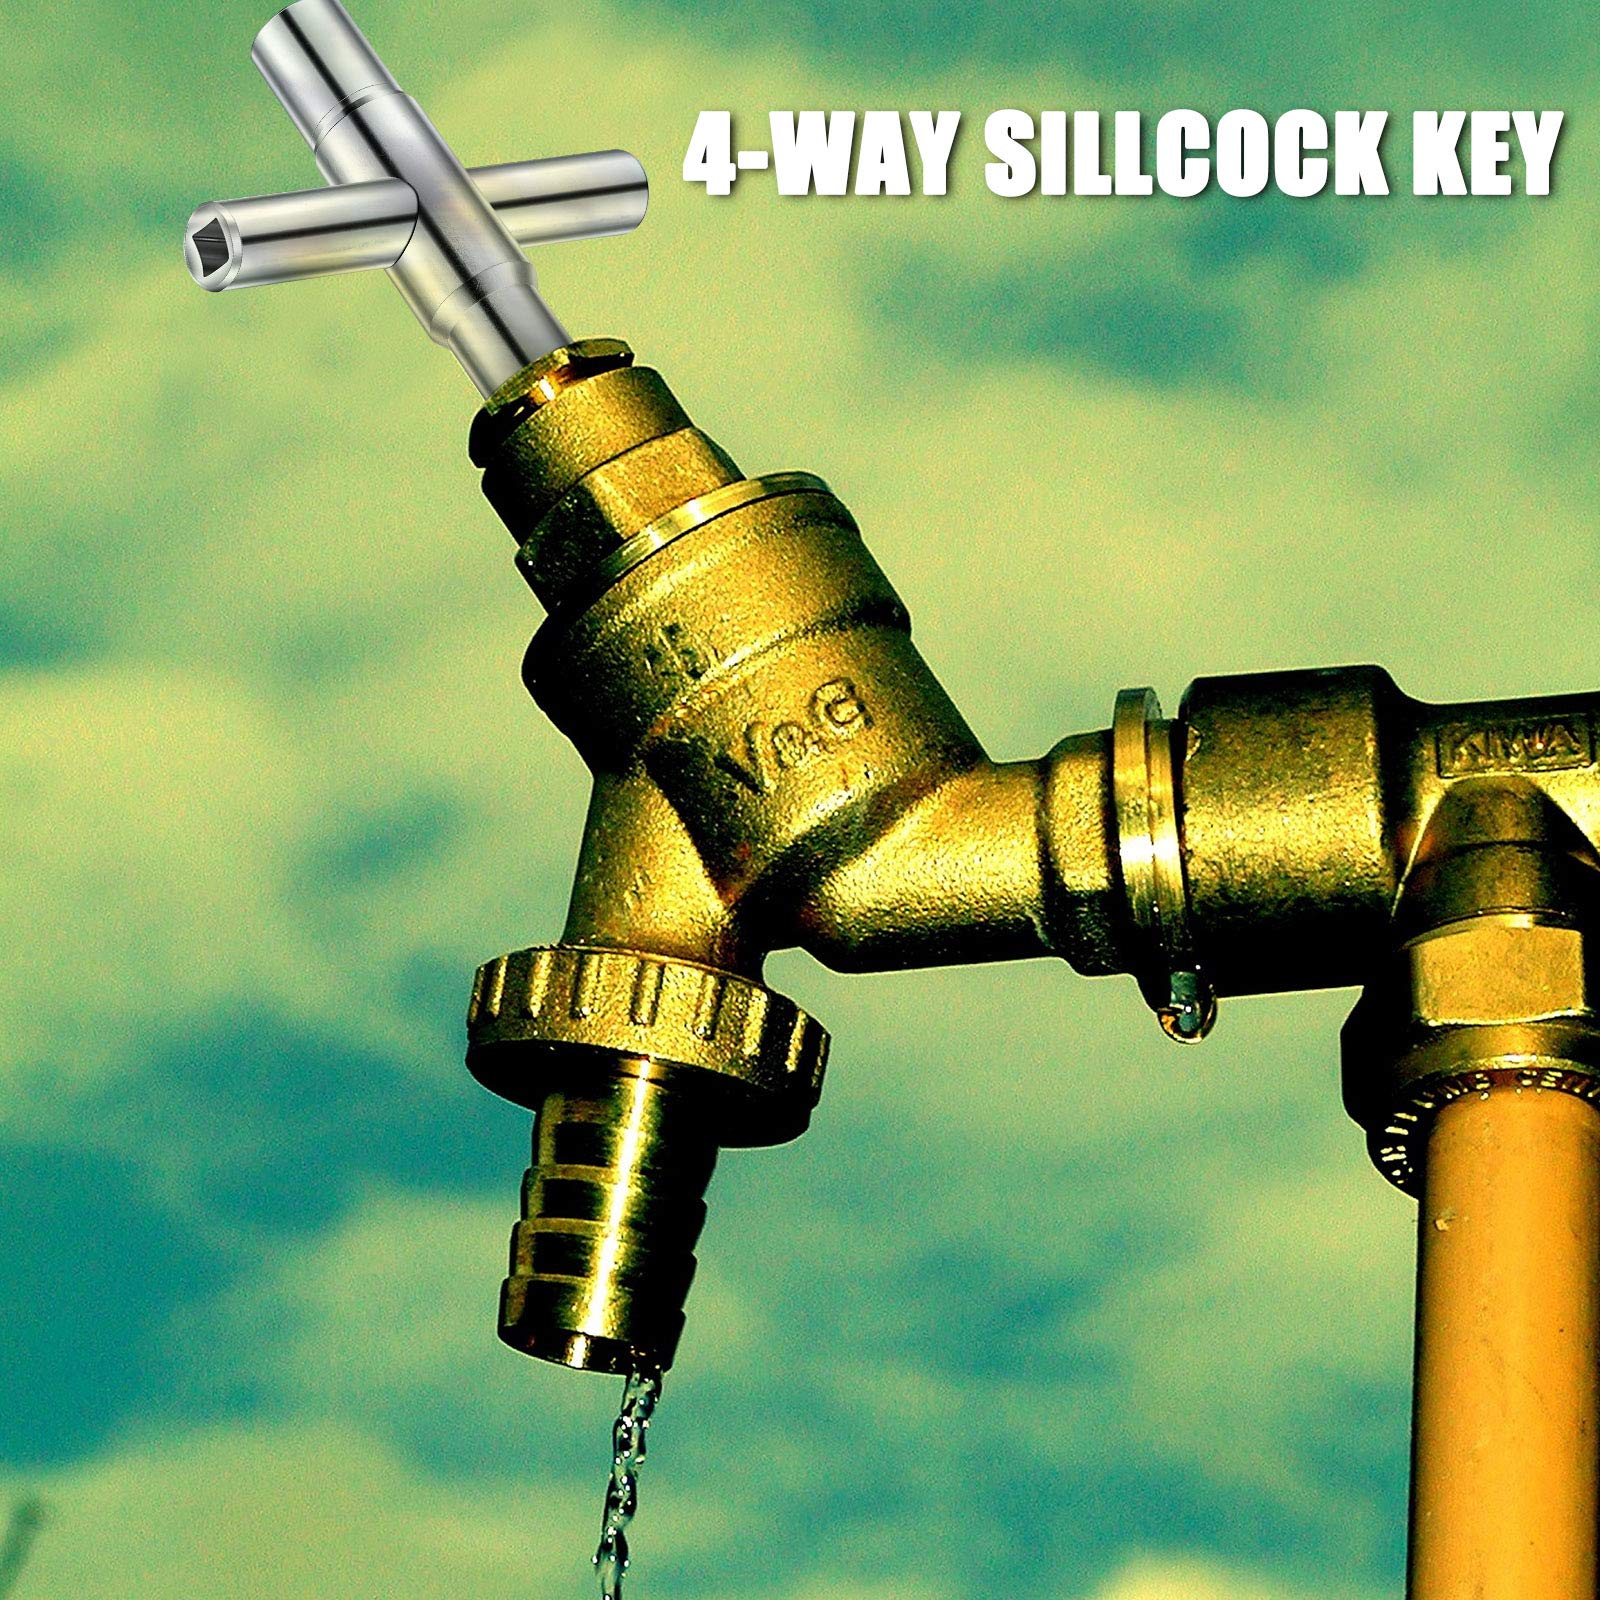 2 Pieces 4 Way Sillcock Key Steel Sillcock Wrench Water Utility Key for Hose Bib Spigot Valve (Silver)